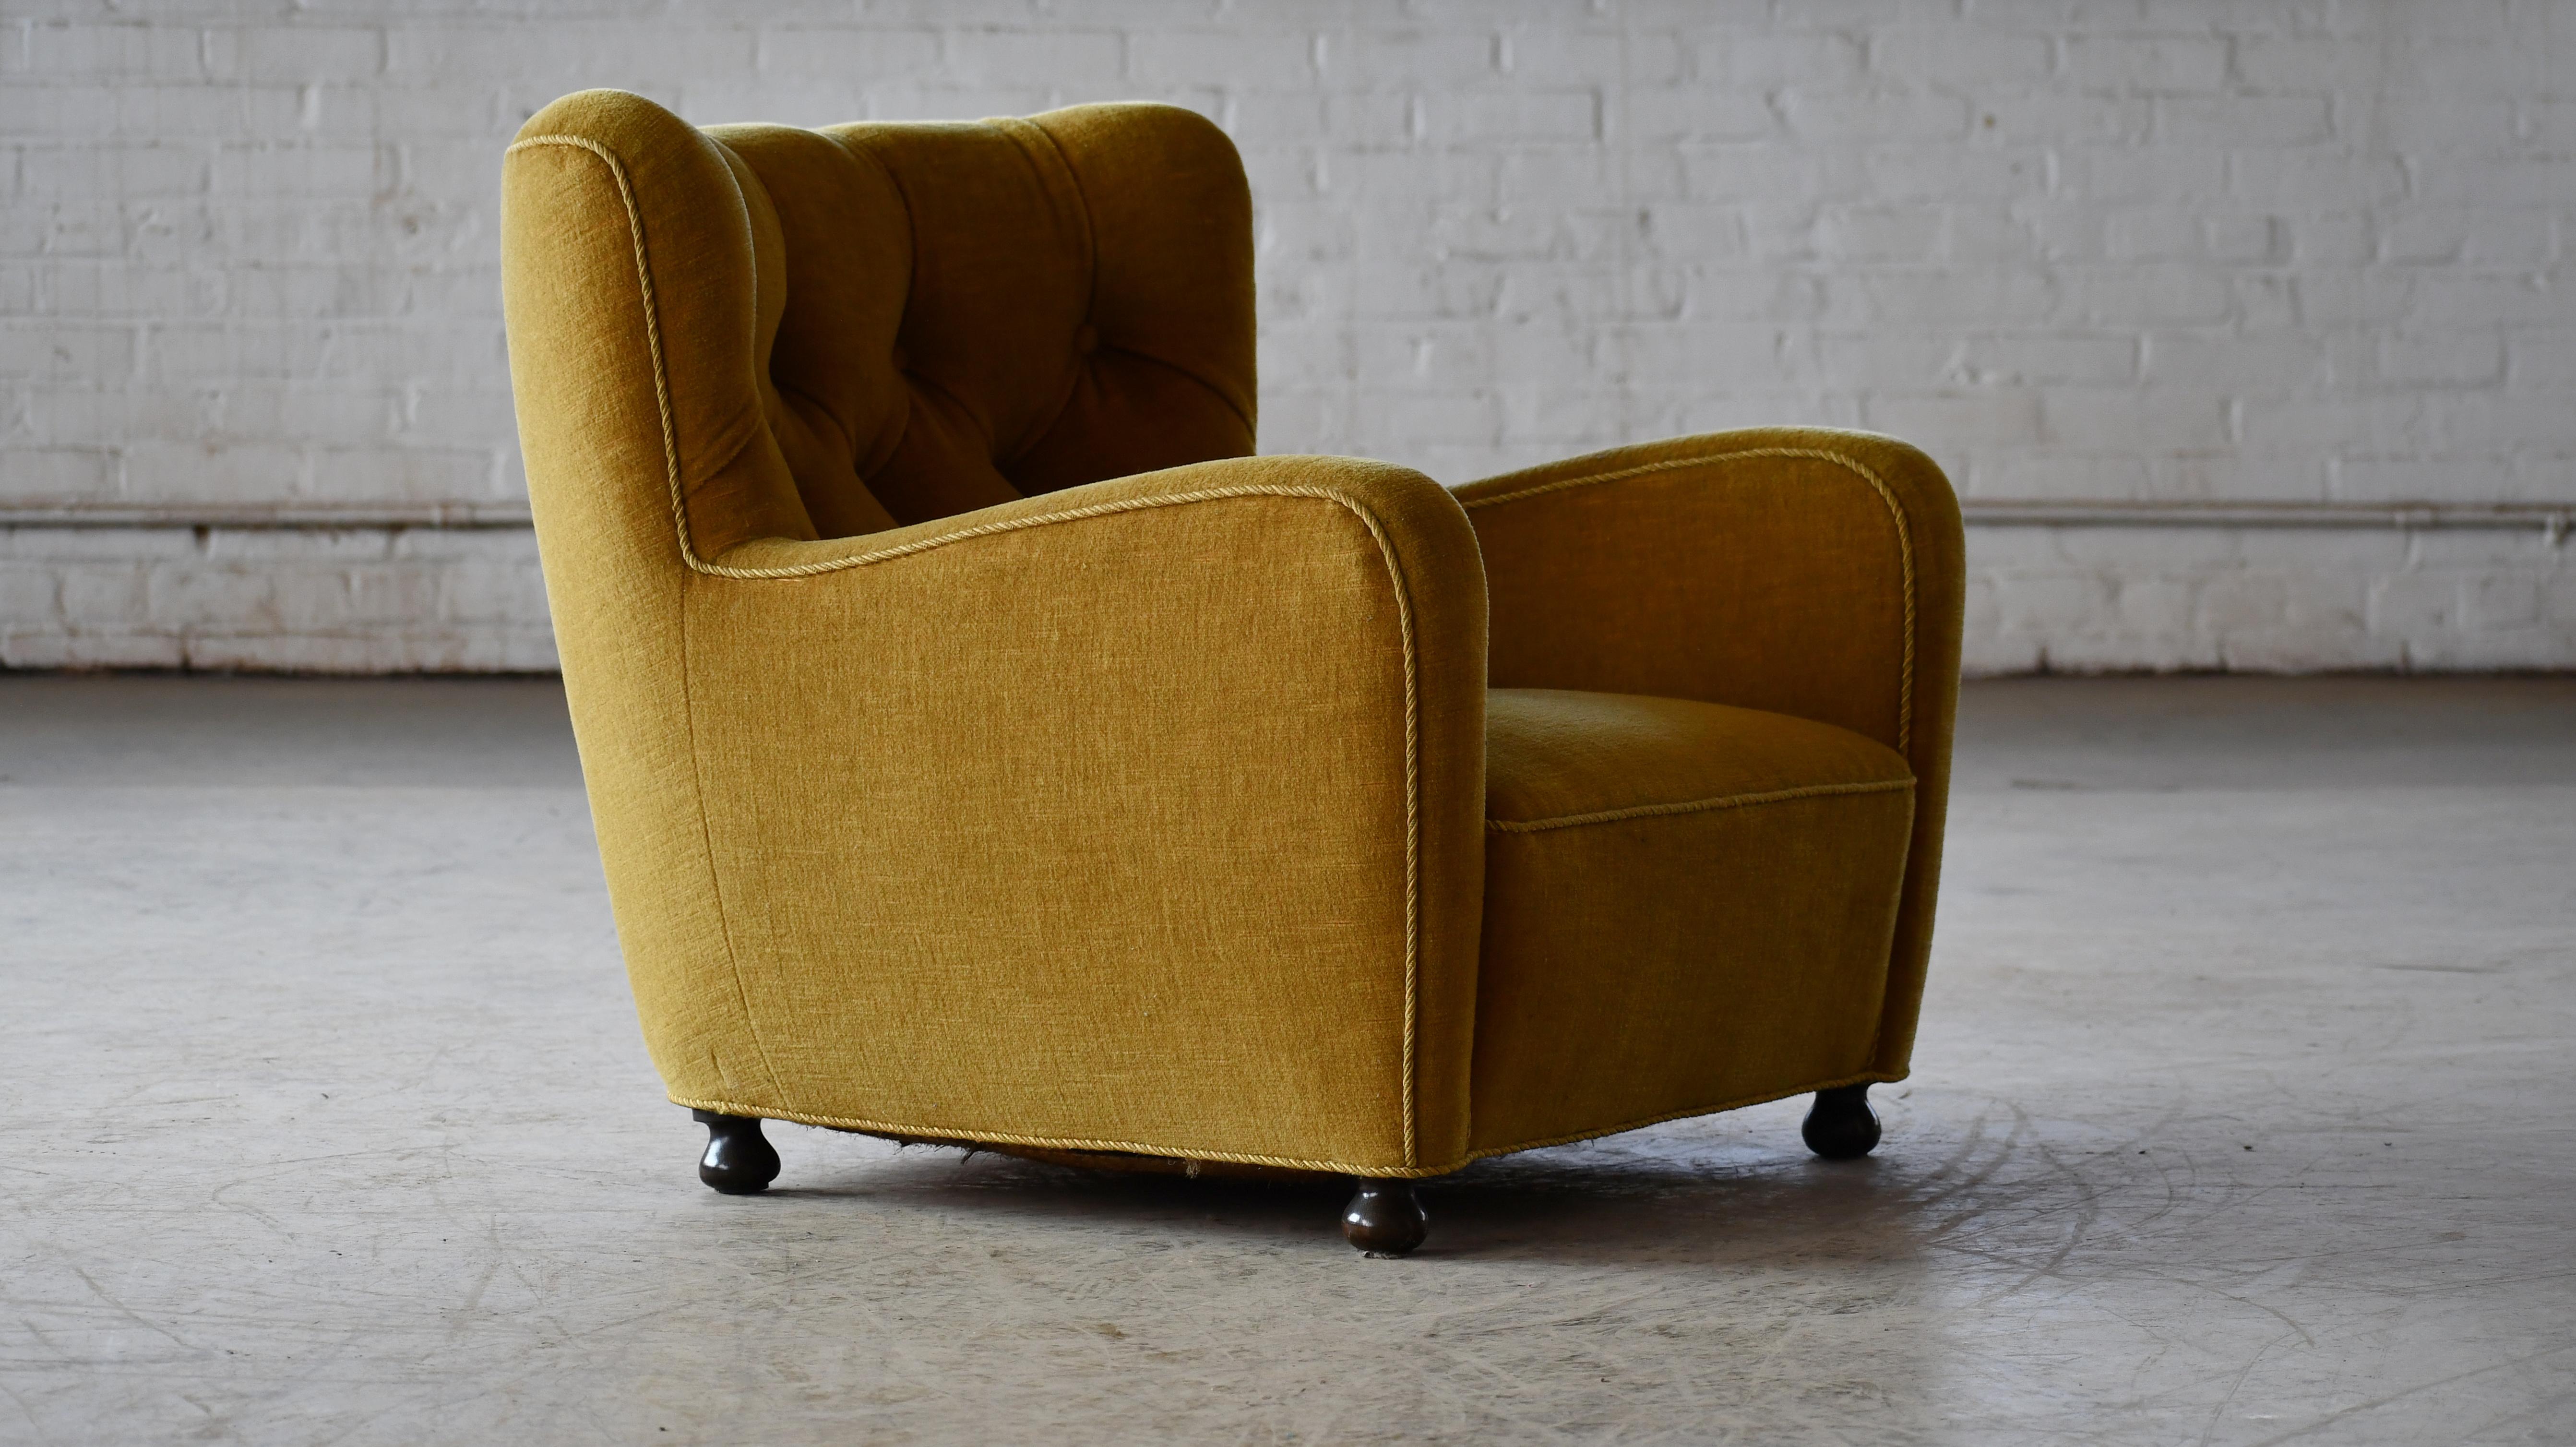 1930-40s Danish Art Deco or Early Midcentury Lounge Chair in Golden Mohair 3